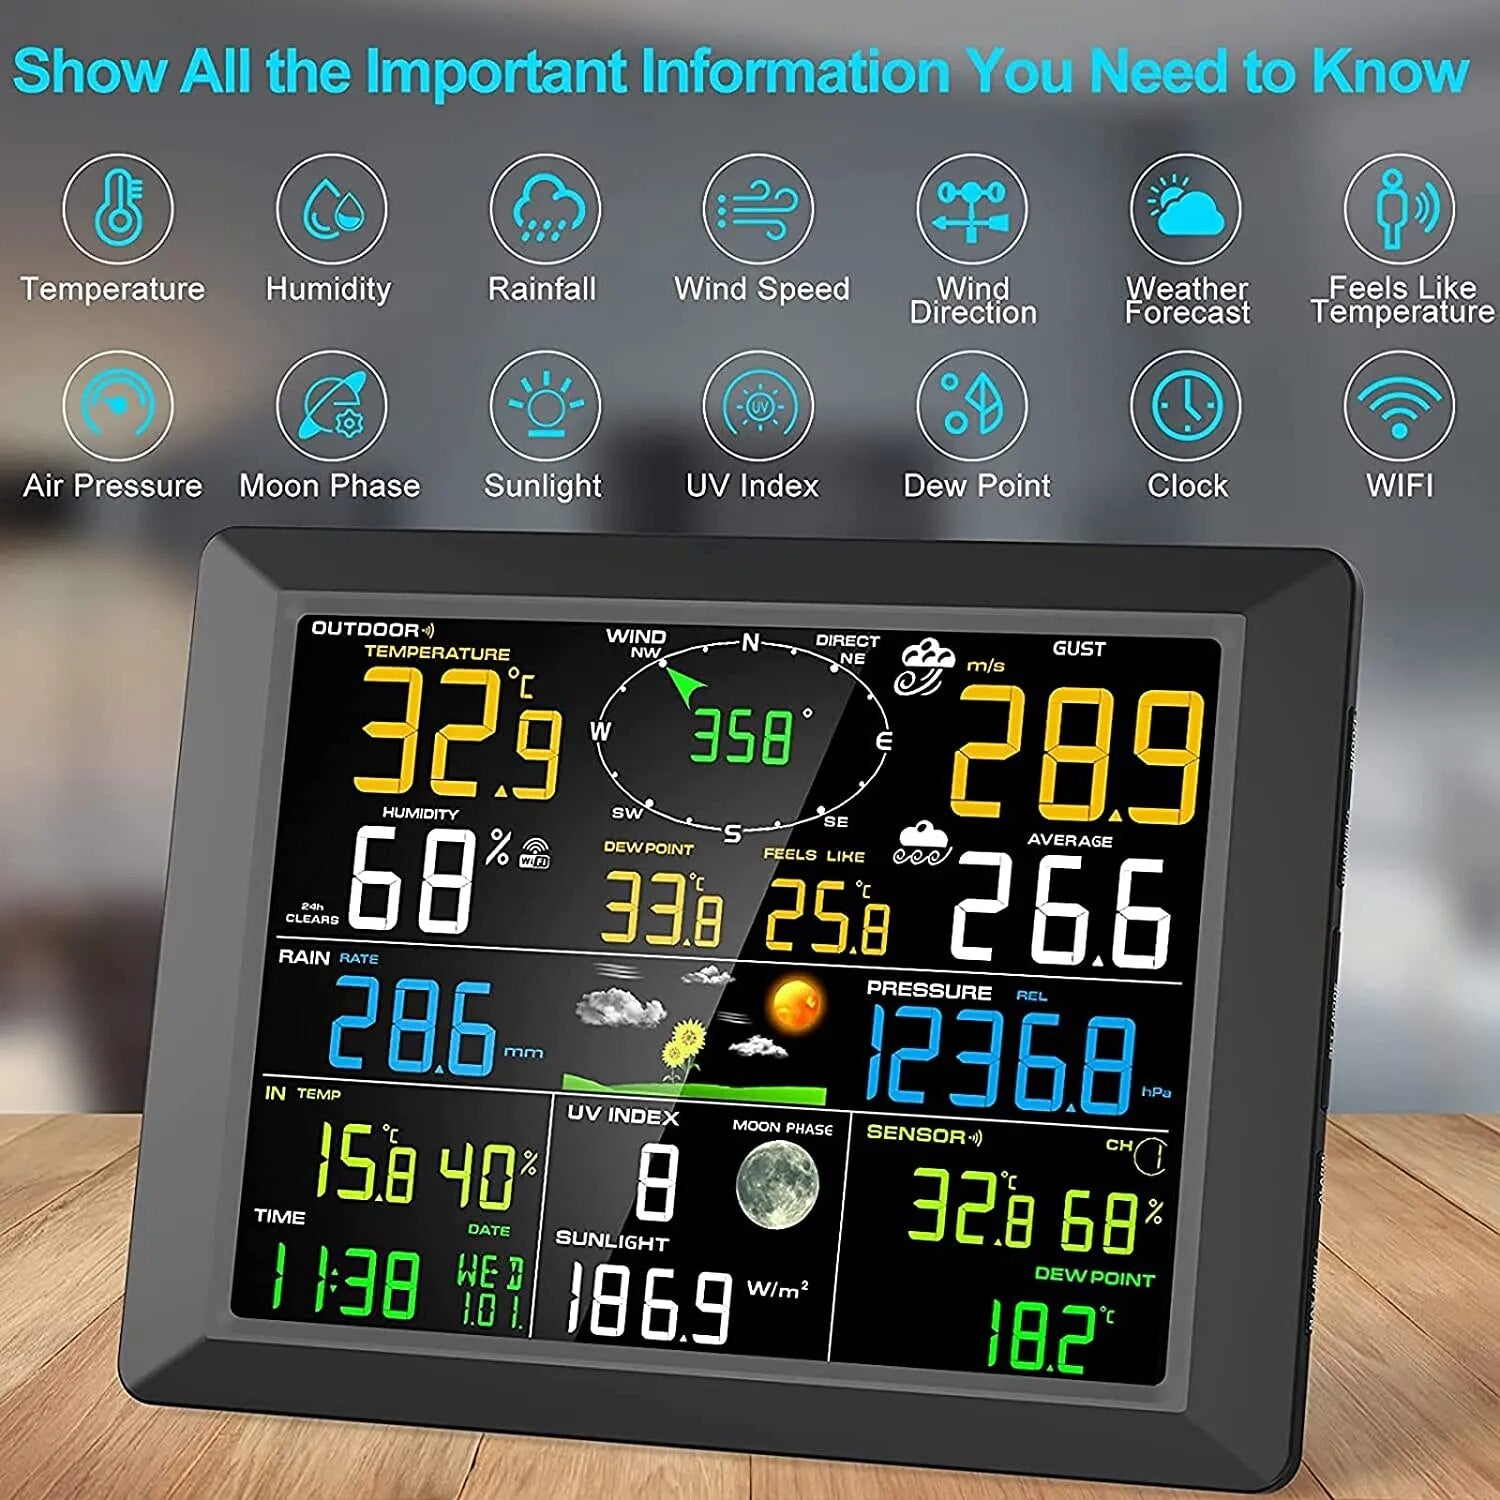 NicetyMeter 7-in-1 Wi-Fi Weather Station Solar Indoor Outdoor Remote Monitoring System Temperature Humidity Wind Speed Direction